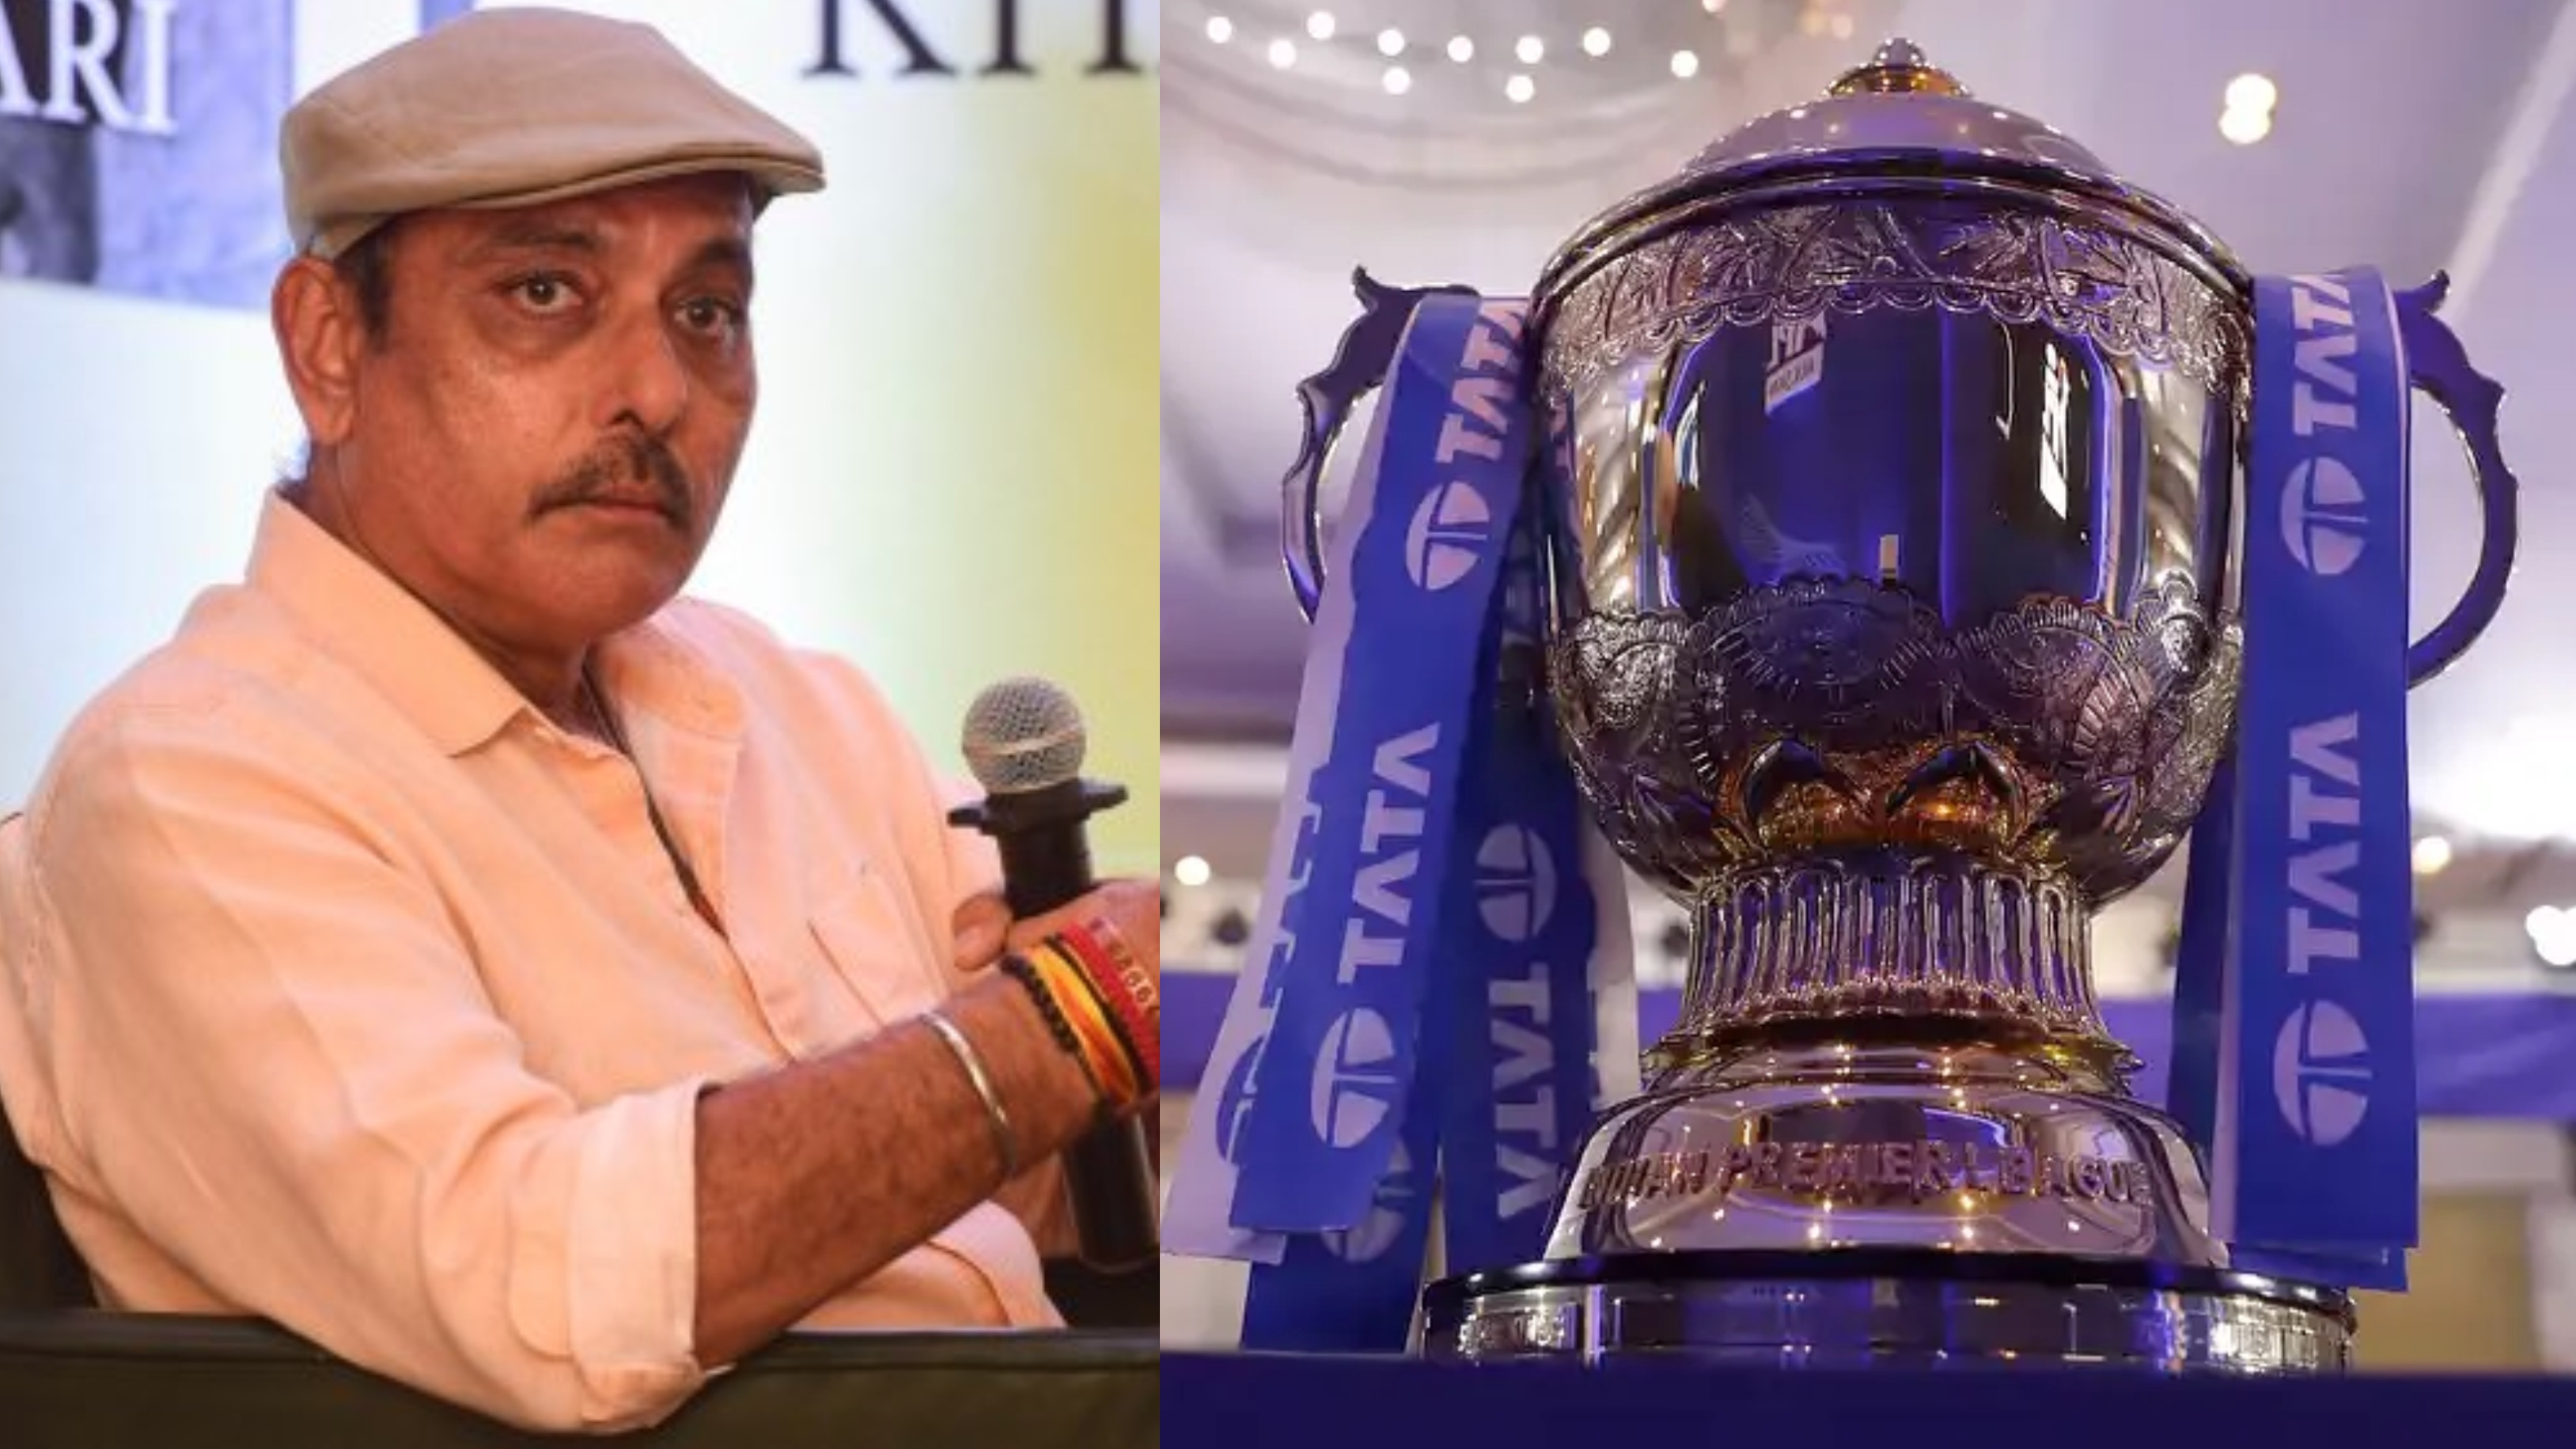 IPL 2022: Ravi Shastri sees IPL 15 as an opportunity to unearth a 